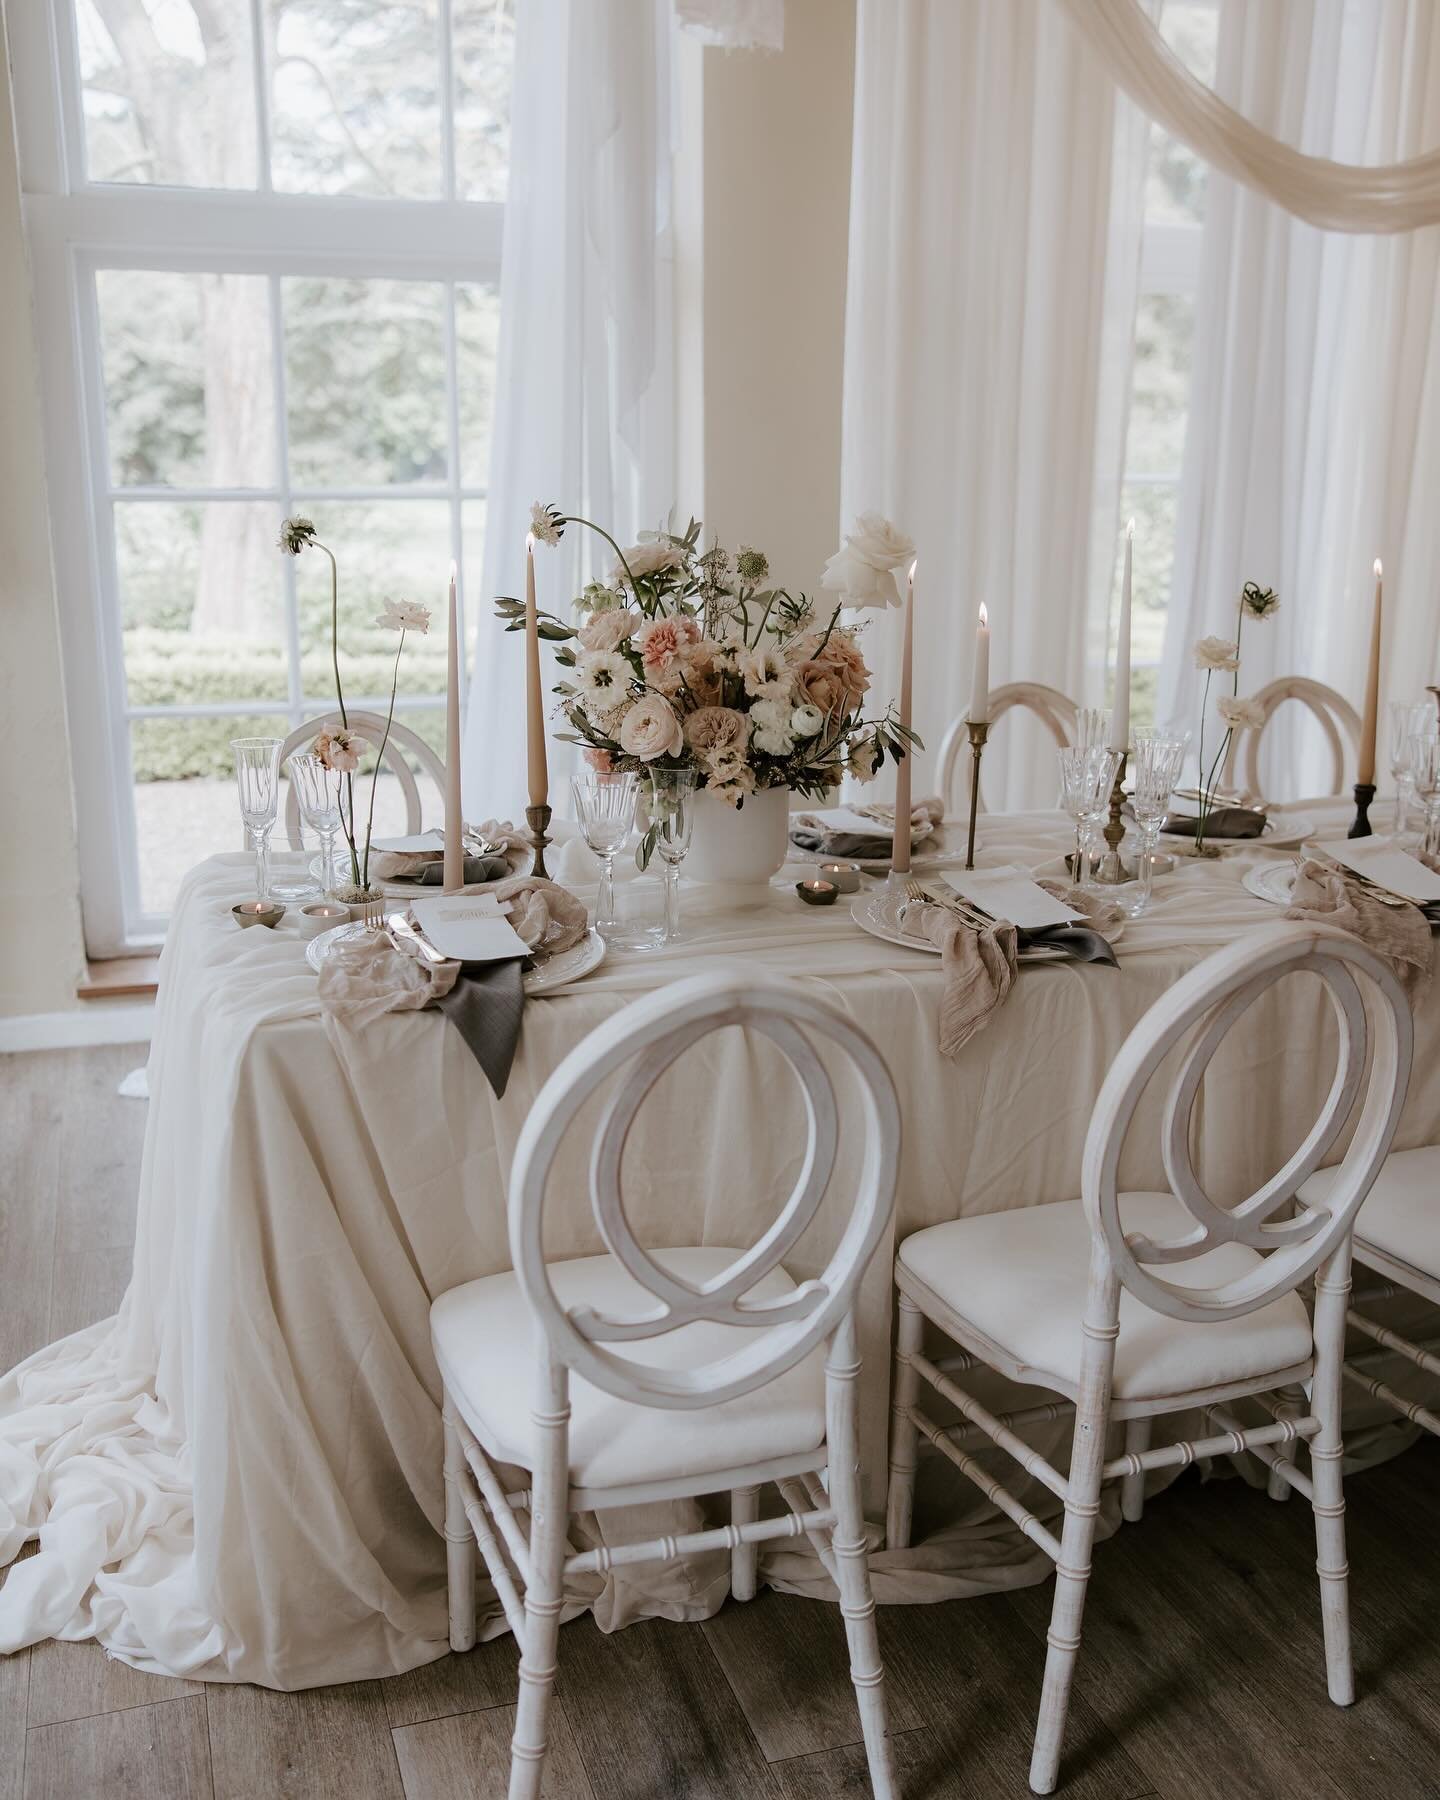 Planning a wedding, then you need to SAVE this inspo post 🤍

Choosing your colour scheme can be hard for some but opting for a muted colour palette with soft shades of ivory, blush pink, dusty rose and sage green will create a romantic and elegant a